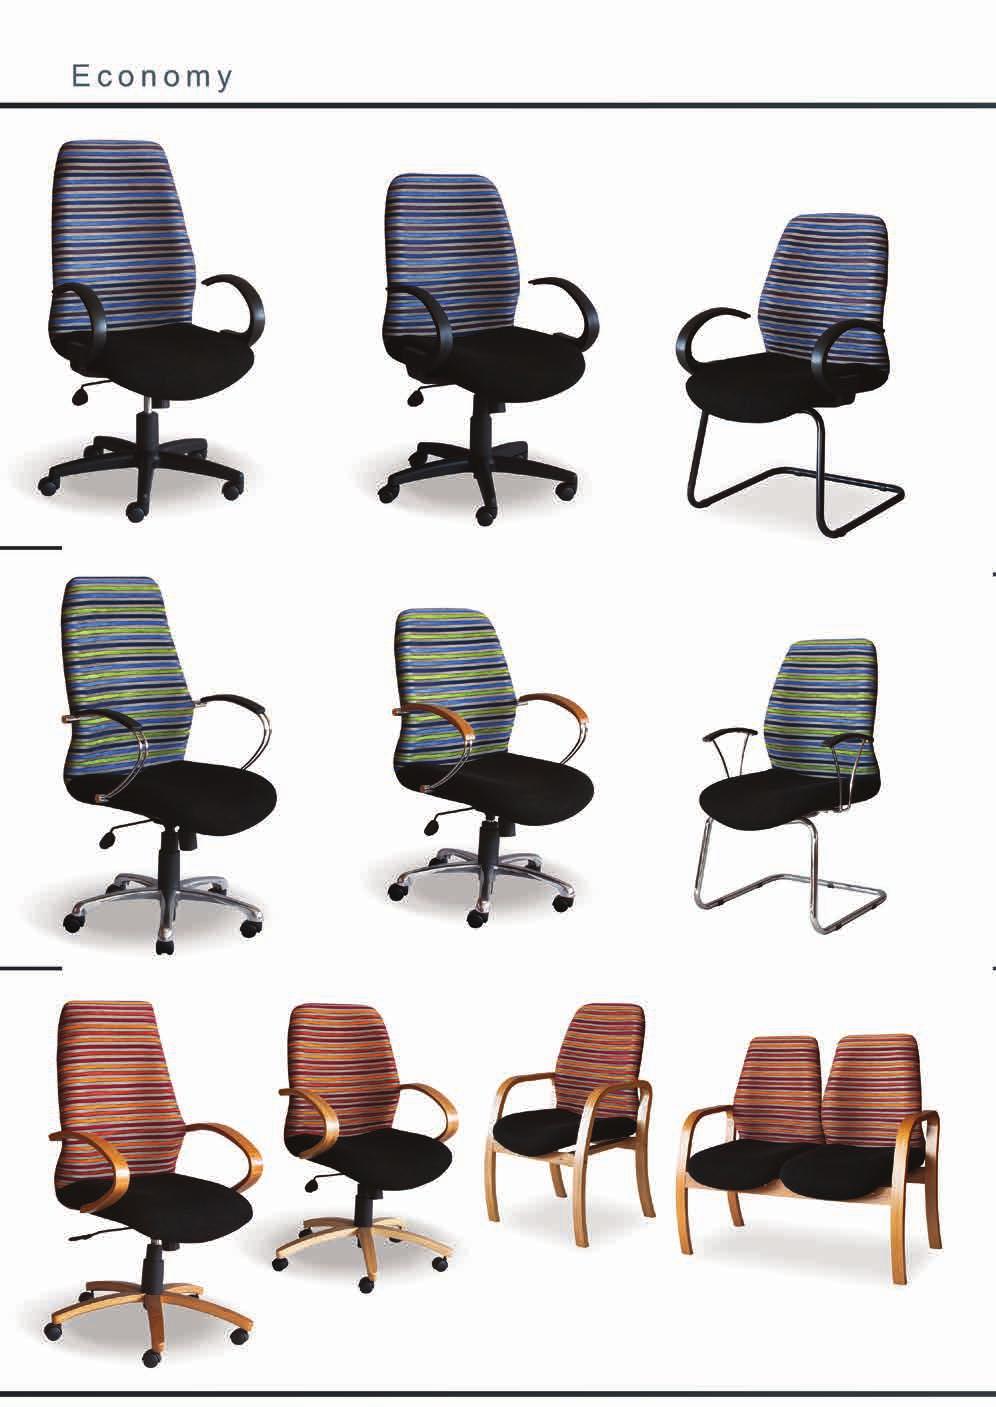 Morant PU Range Also Available in Speedline, see page 15 Back: Helm Textile Mills - Studio Stripe - Haze Seat: Helm Textile Mills - Studio Plain - Black Morant Chrome Range Back: Helm Textile Mills -